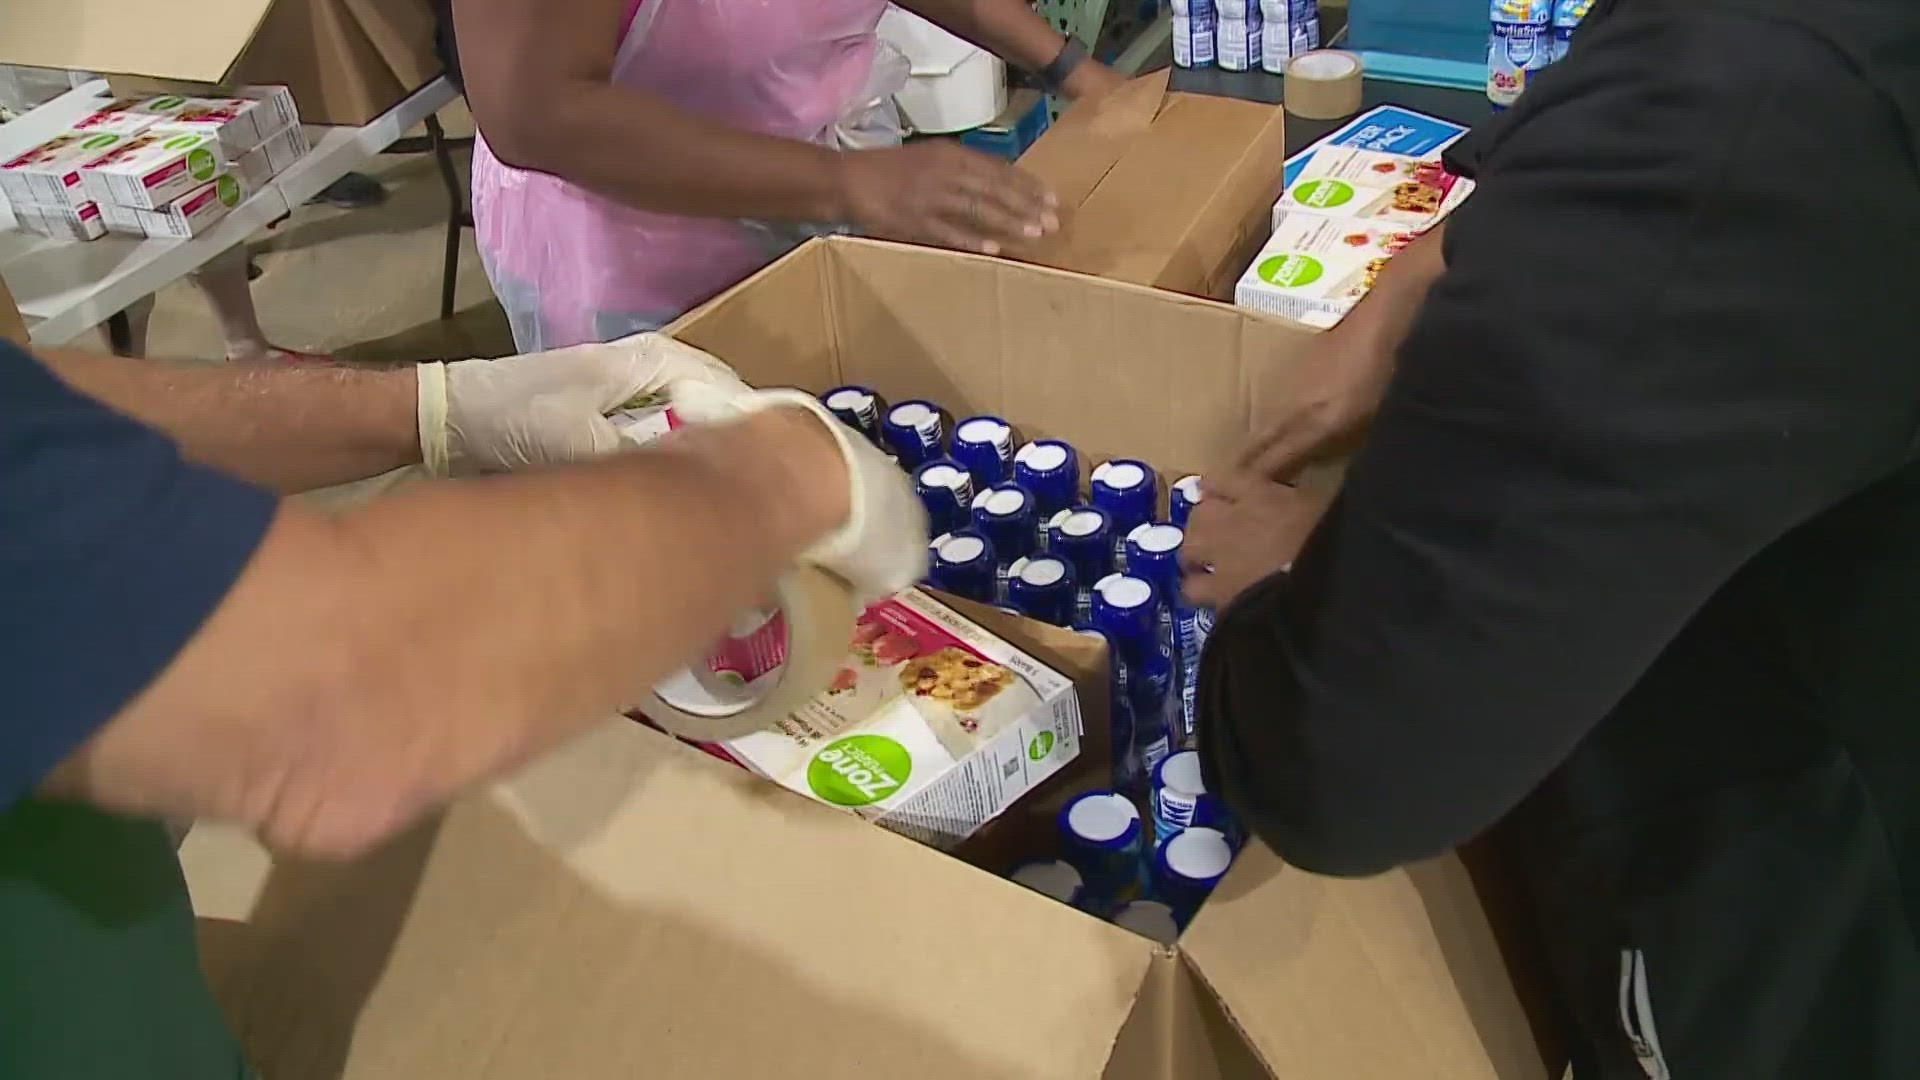 The emergency kits have enough food to sustain an individual or a family for three days. It's an essential disaster relief tool for Second Harvest.